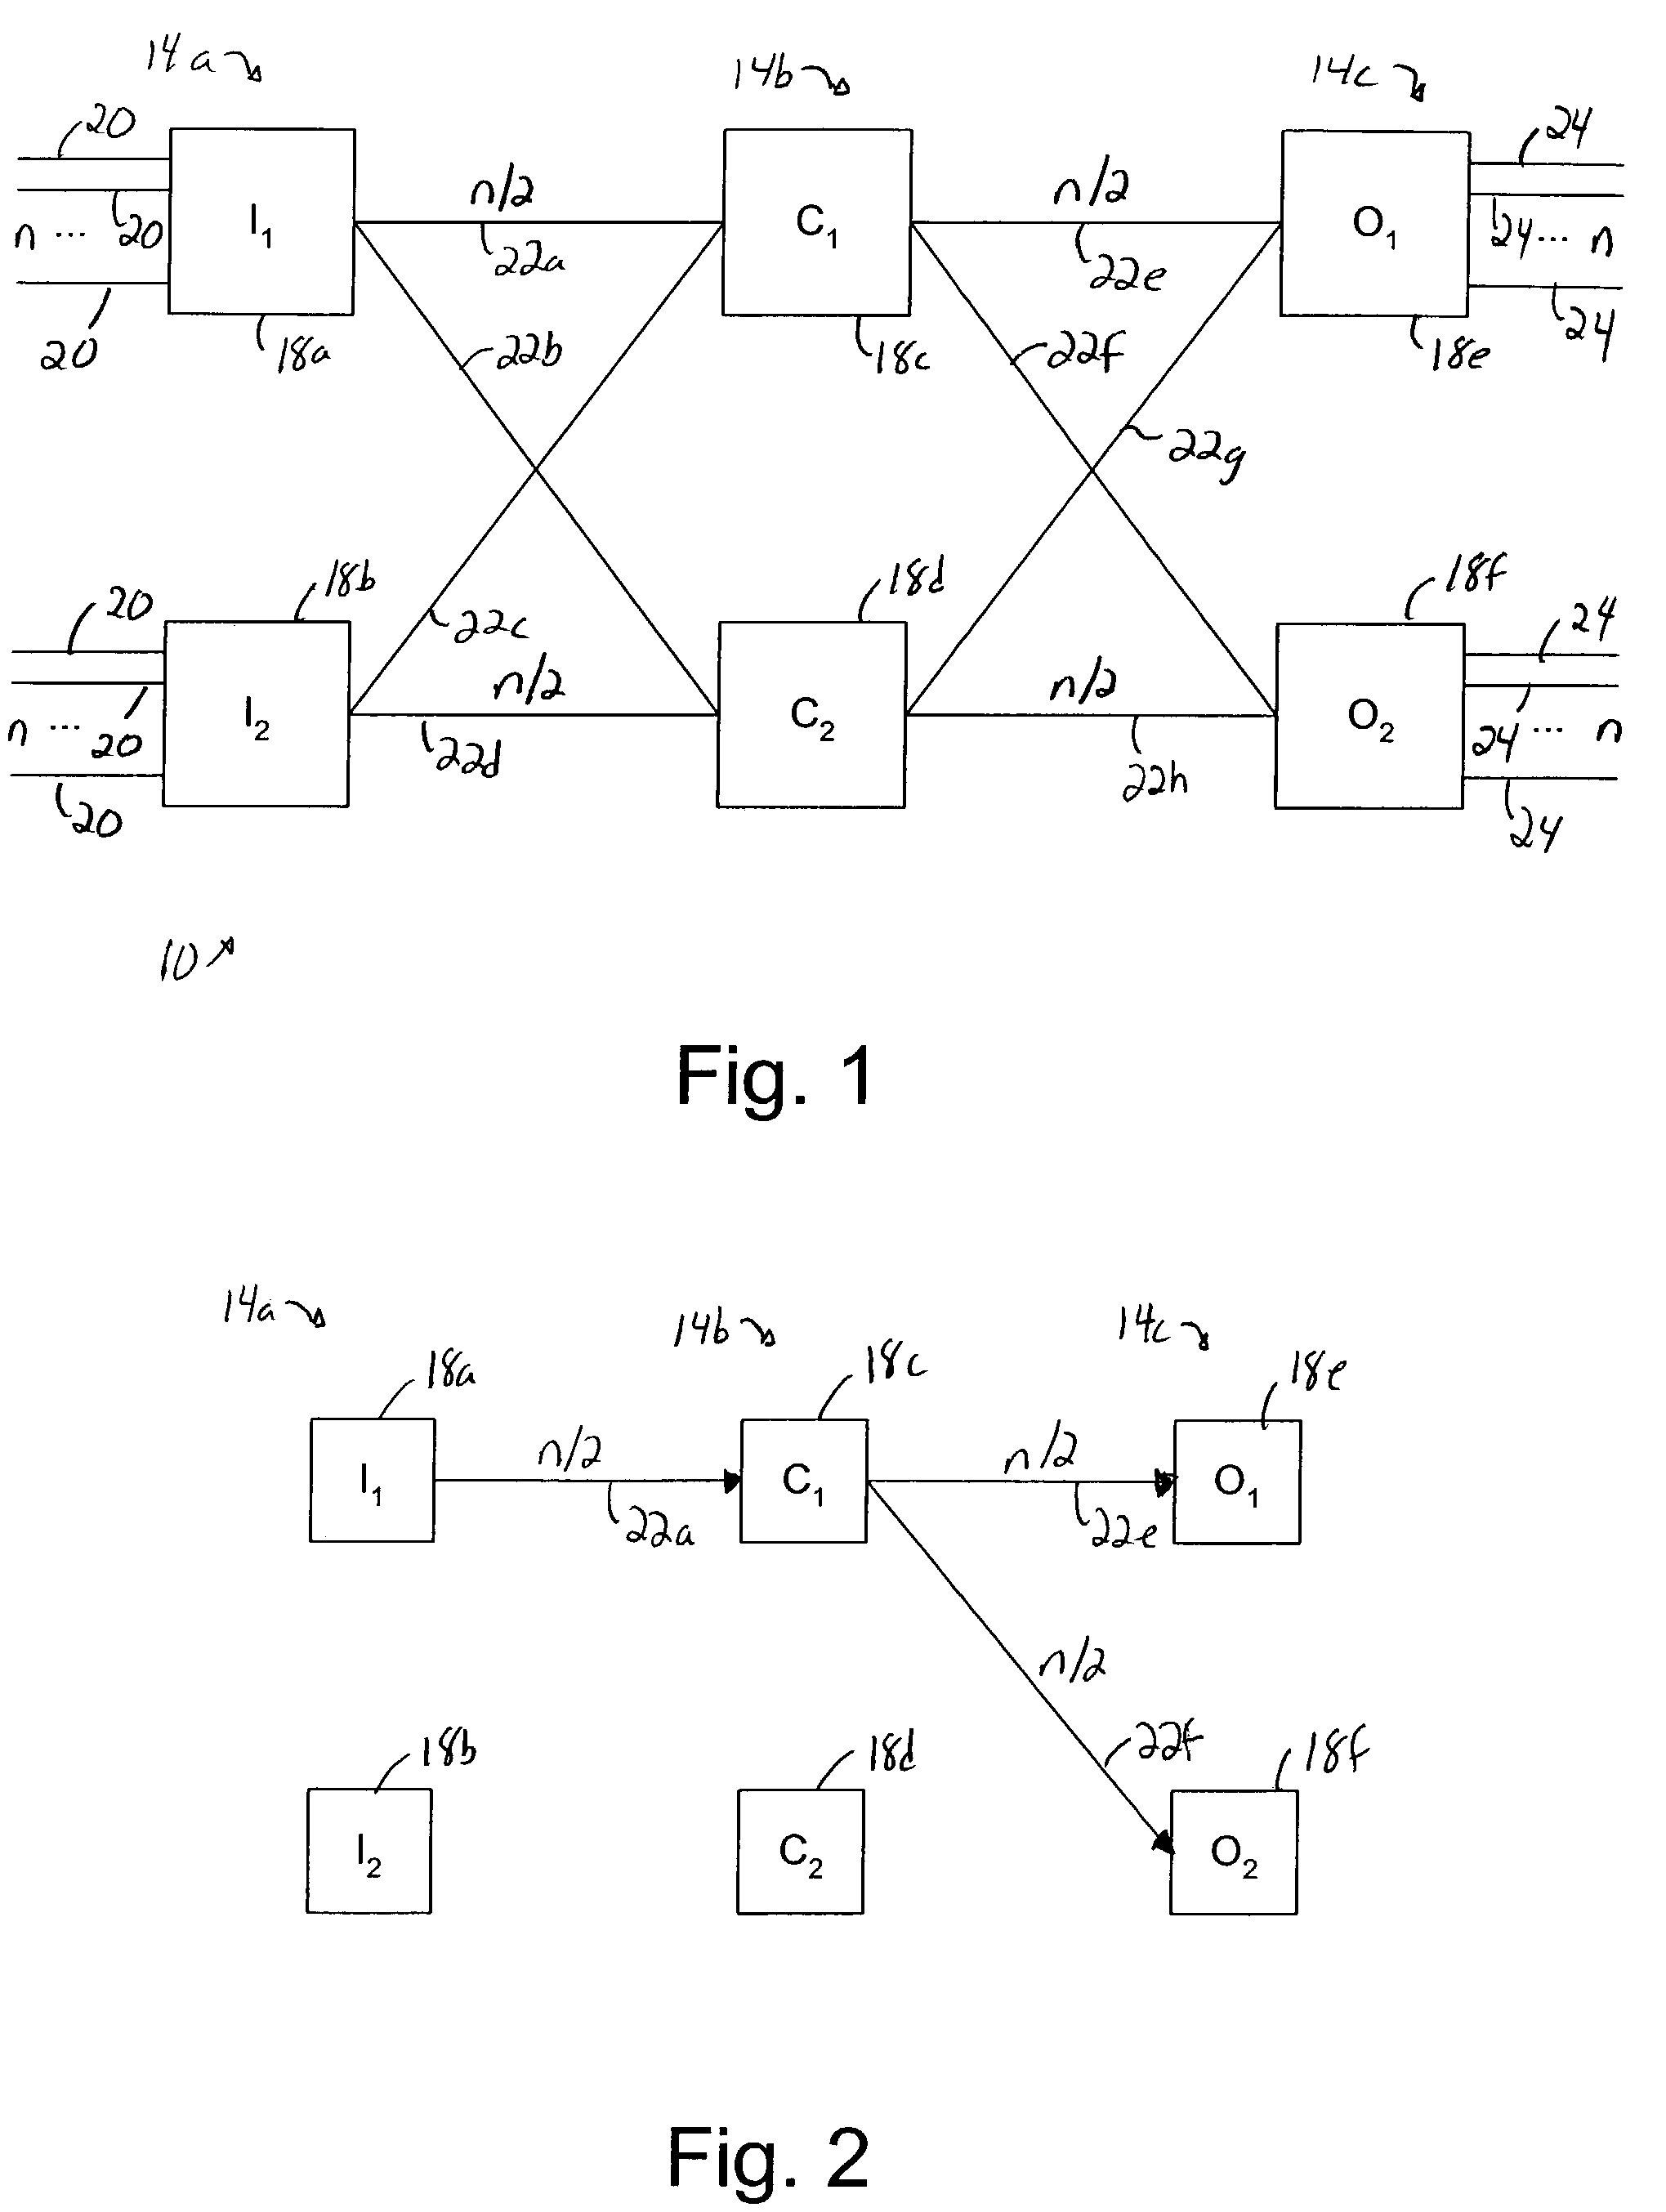 Method and apparatus for mixed-cast routing through a Clos-like network